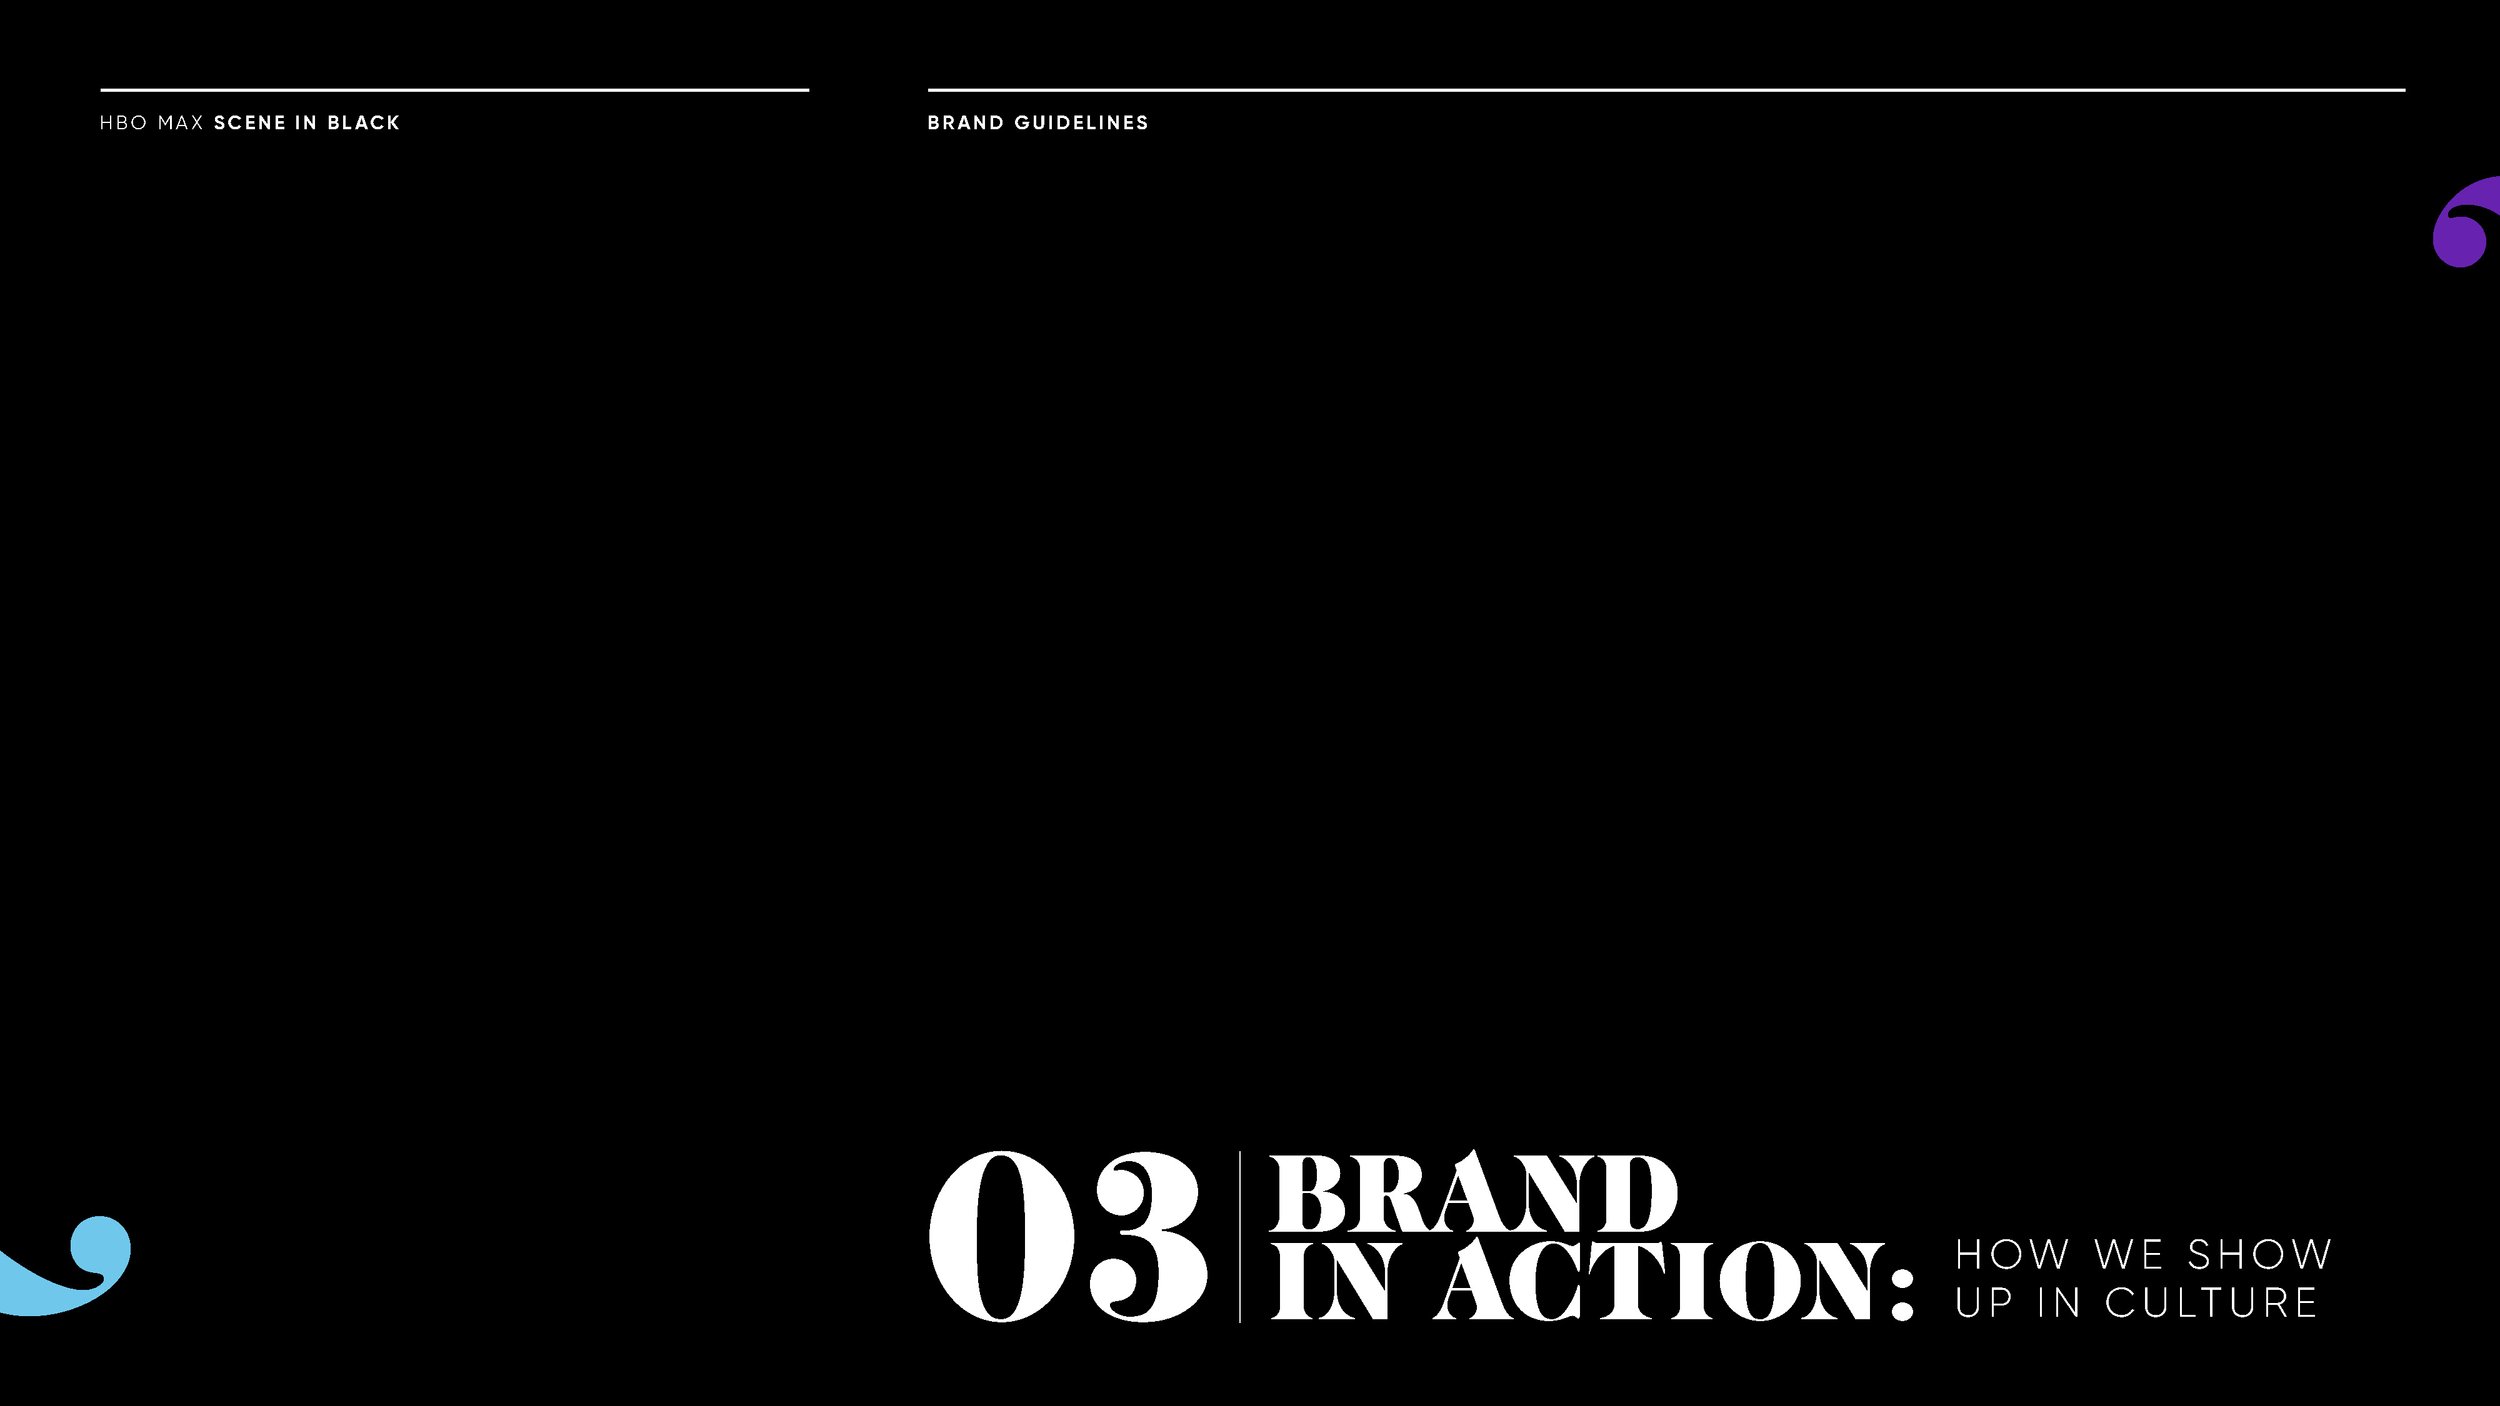 HBOMax_SceneinBlack | Brand Guidelines | Final Oct21_Page_24.jpg